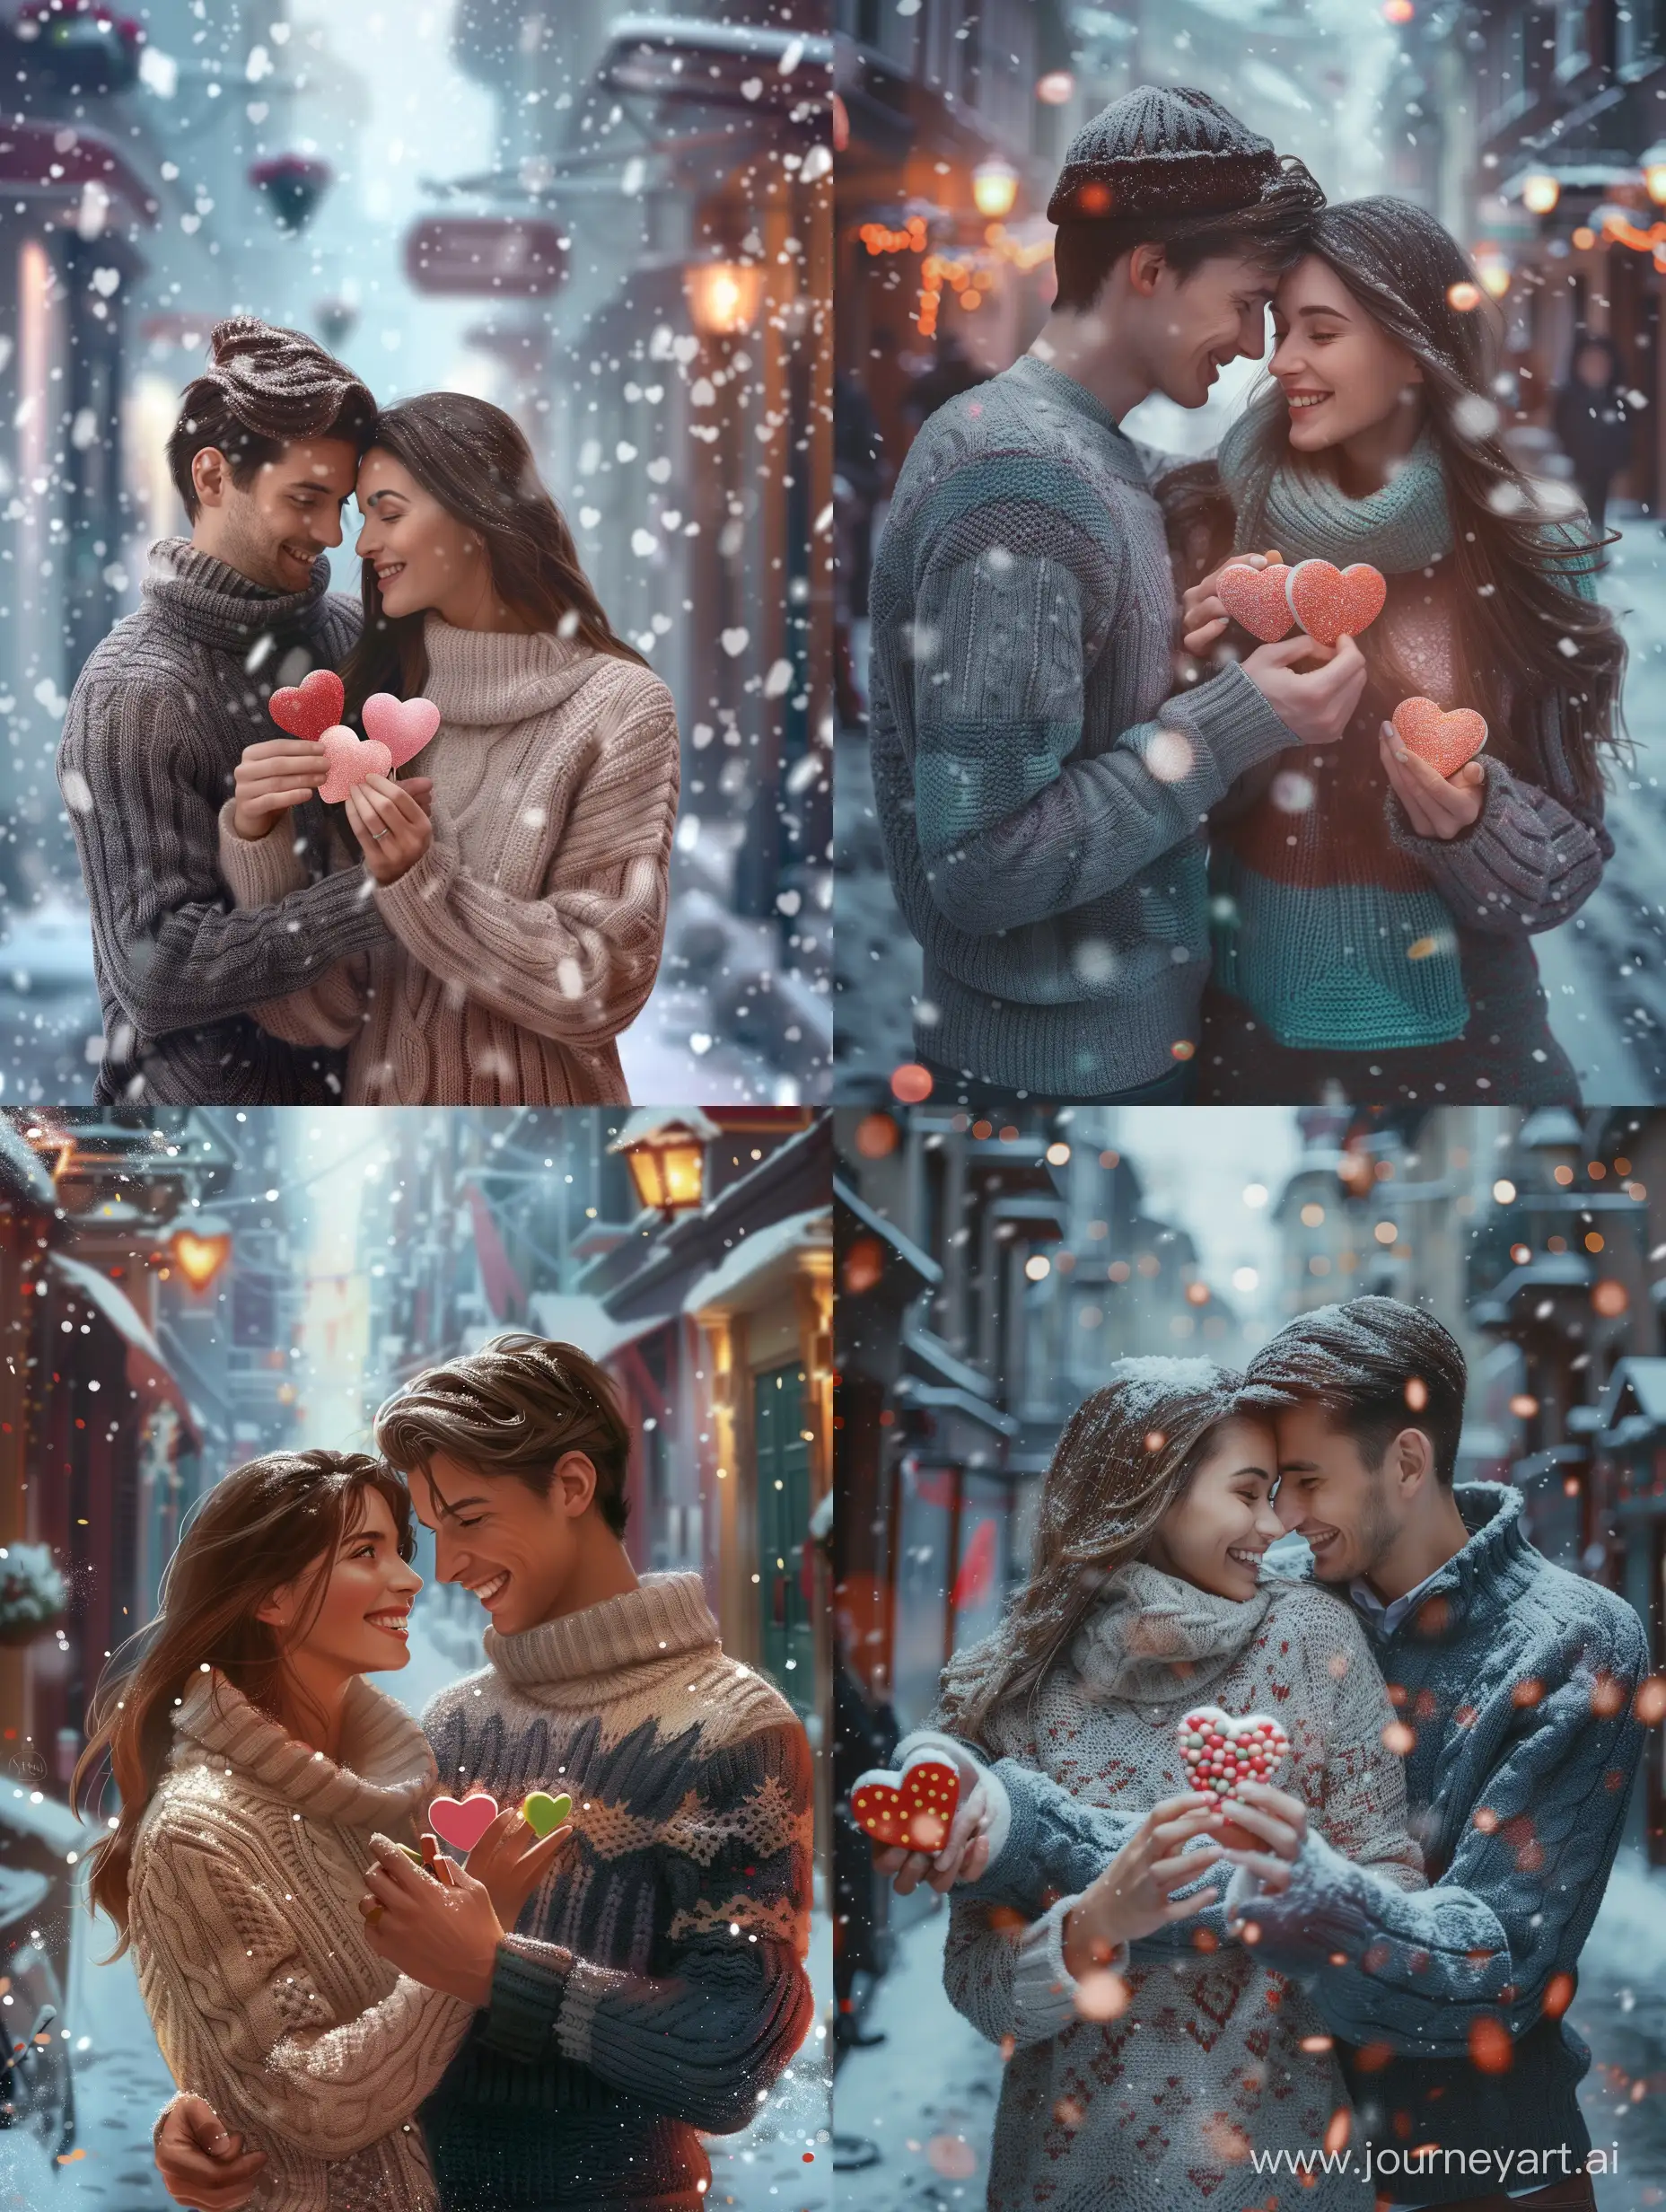 Romantic-Couple-Embracing-with-HeartShaped-Candies-in-Snowy-Street